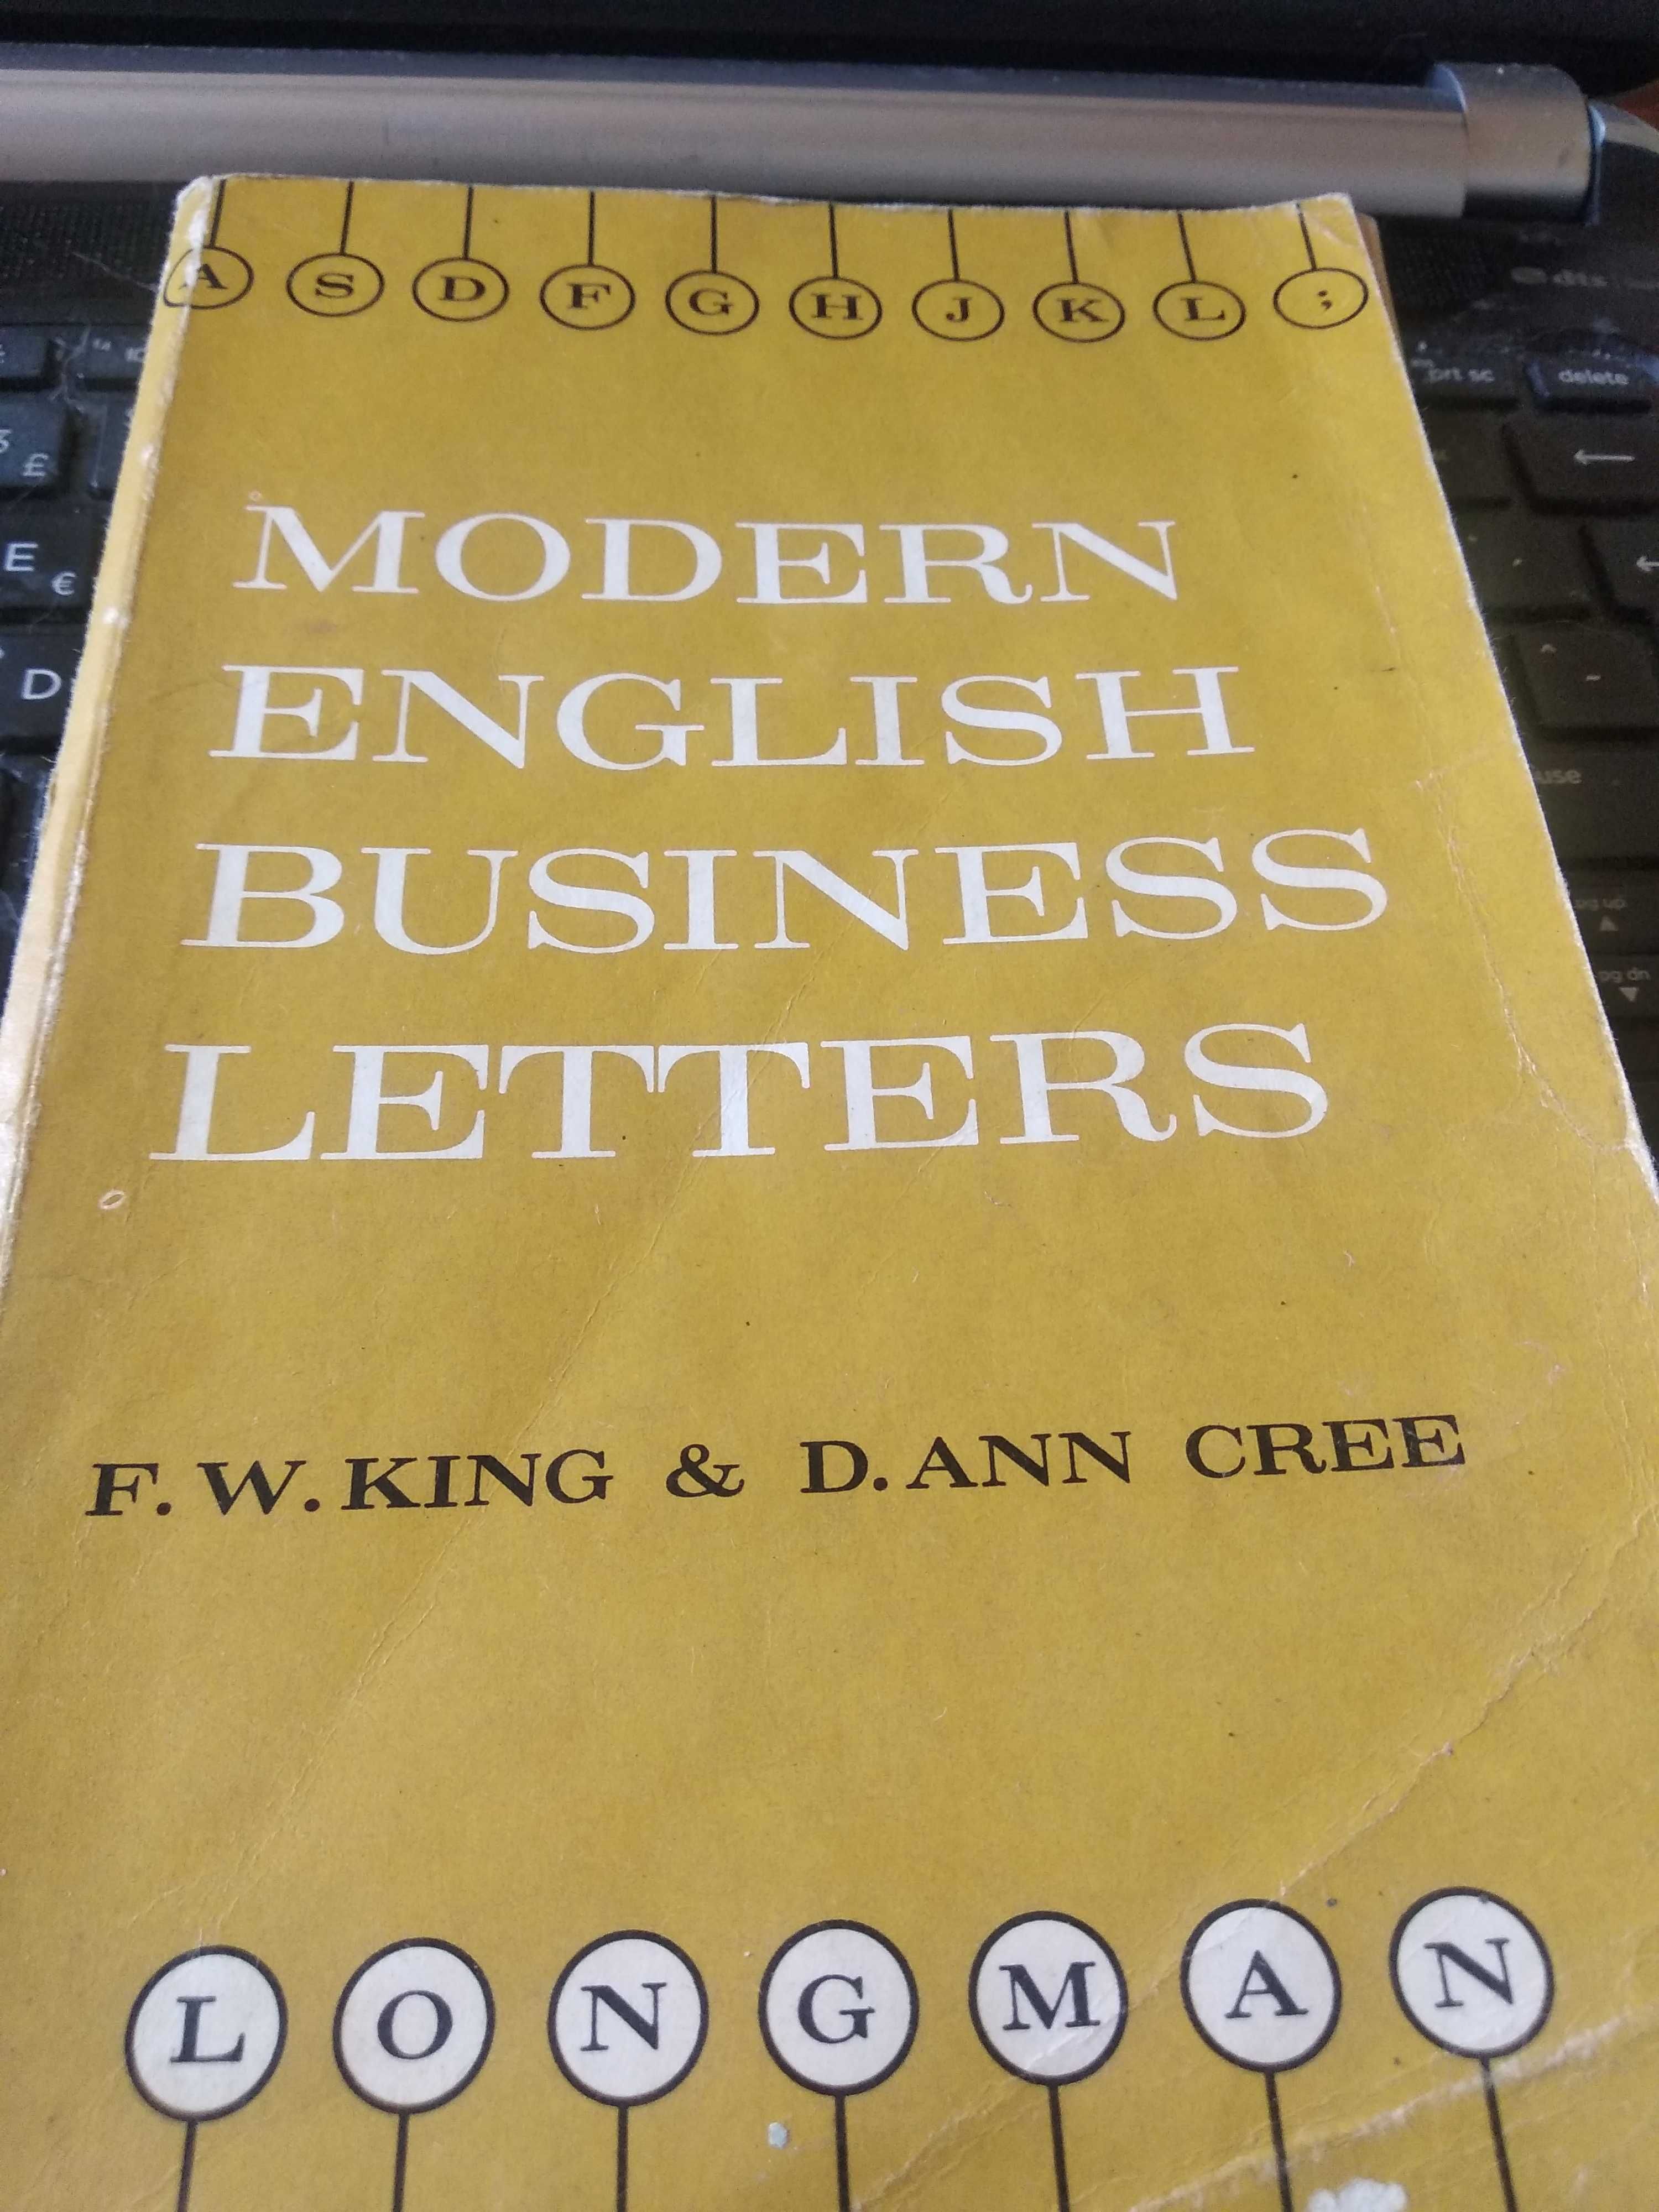 Modern English Business Letters